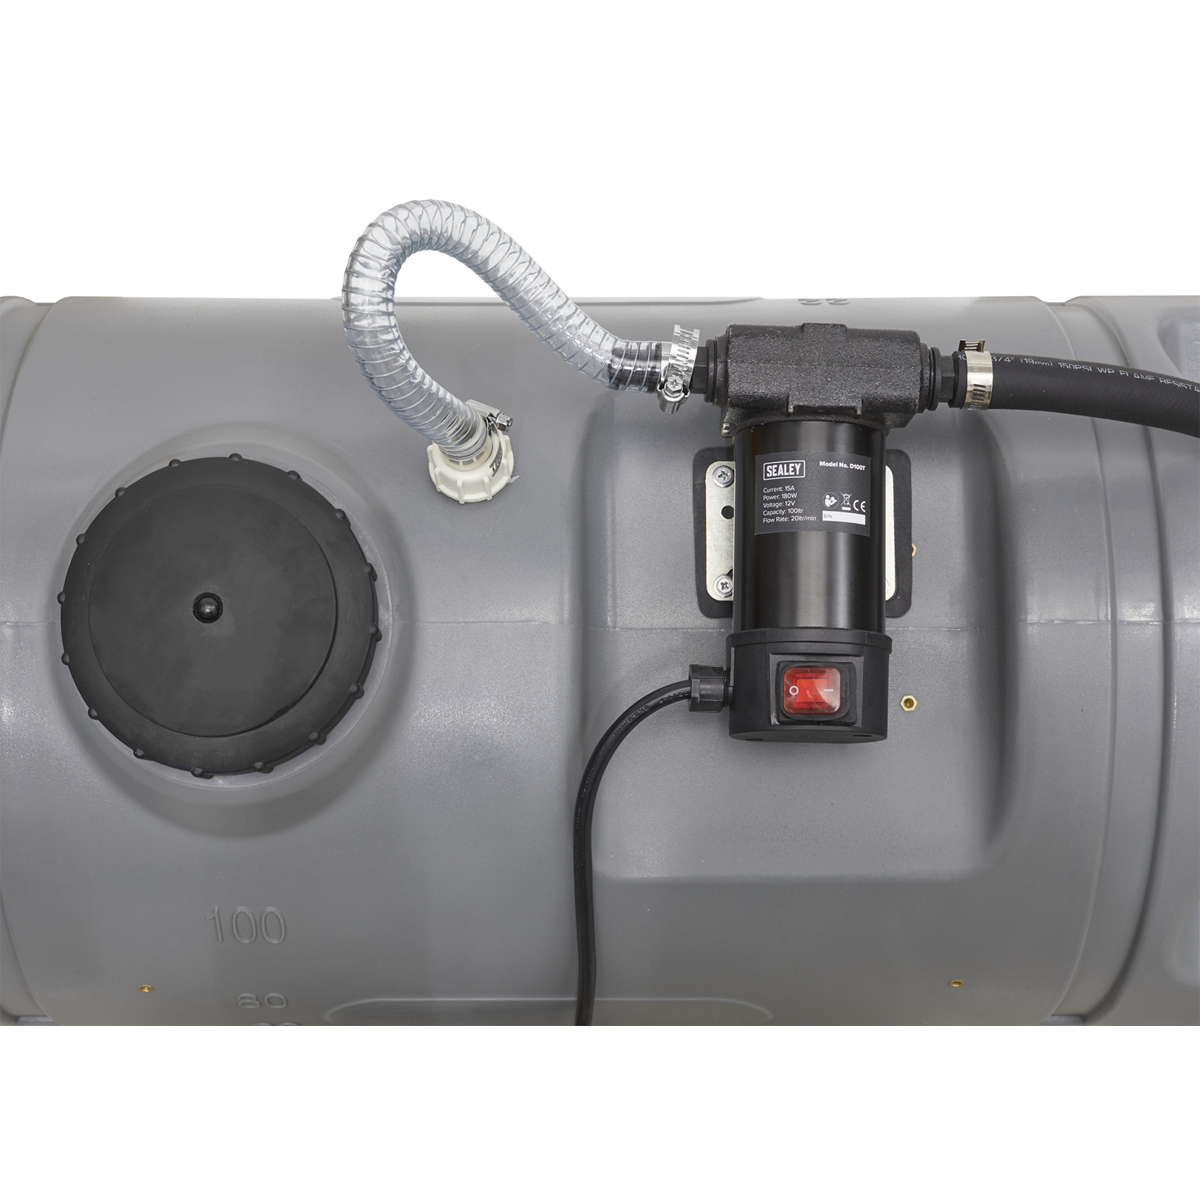 Portable tanks comes with 12V electric pump, 4m electric cable and clamps, security valve and a 4m delivery hose with fuel nozzle